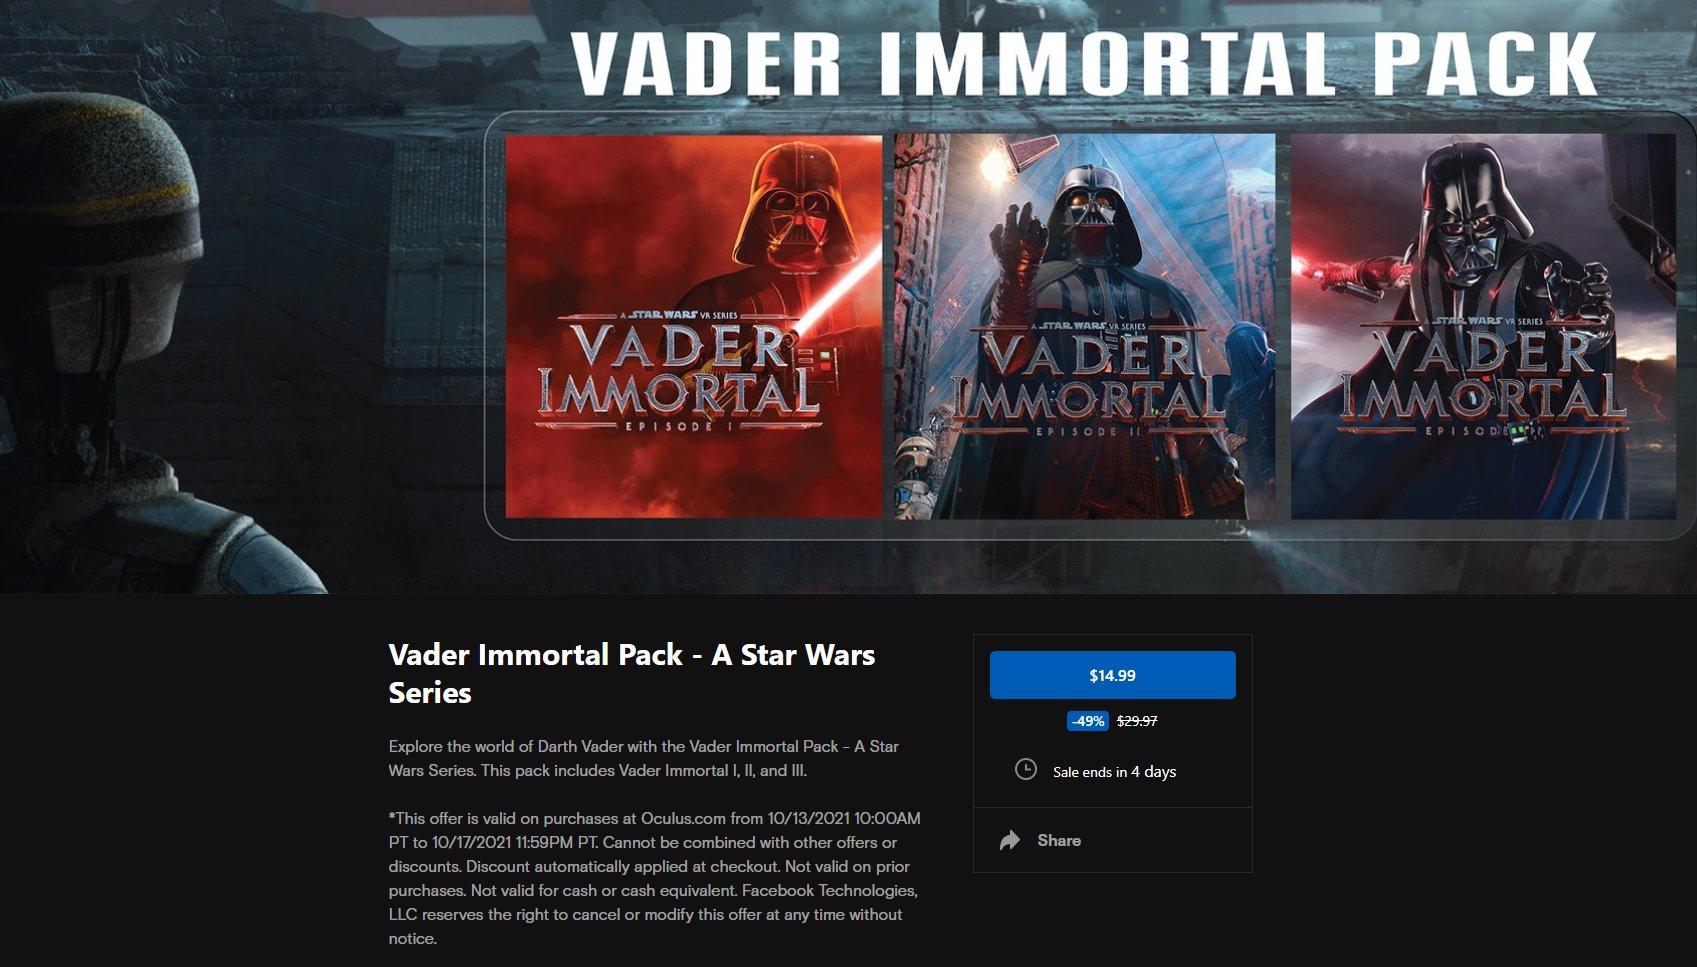 Wario64 on Immortal Pack - A Star Wars Series is $14.99 Quest https://t.co/h9pHSLuh0h https://t.co/8SaIVXHrvR" / Twitter